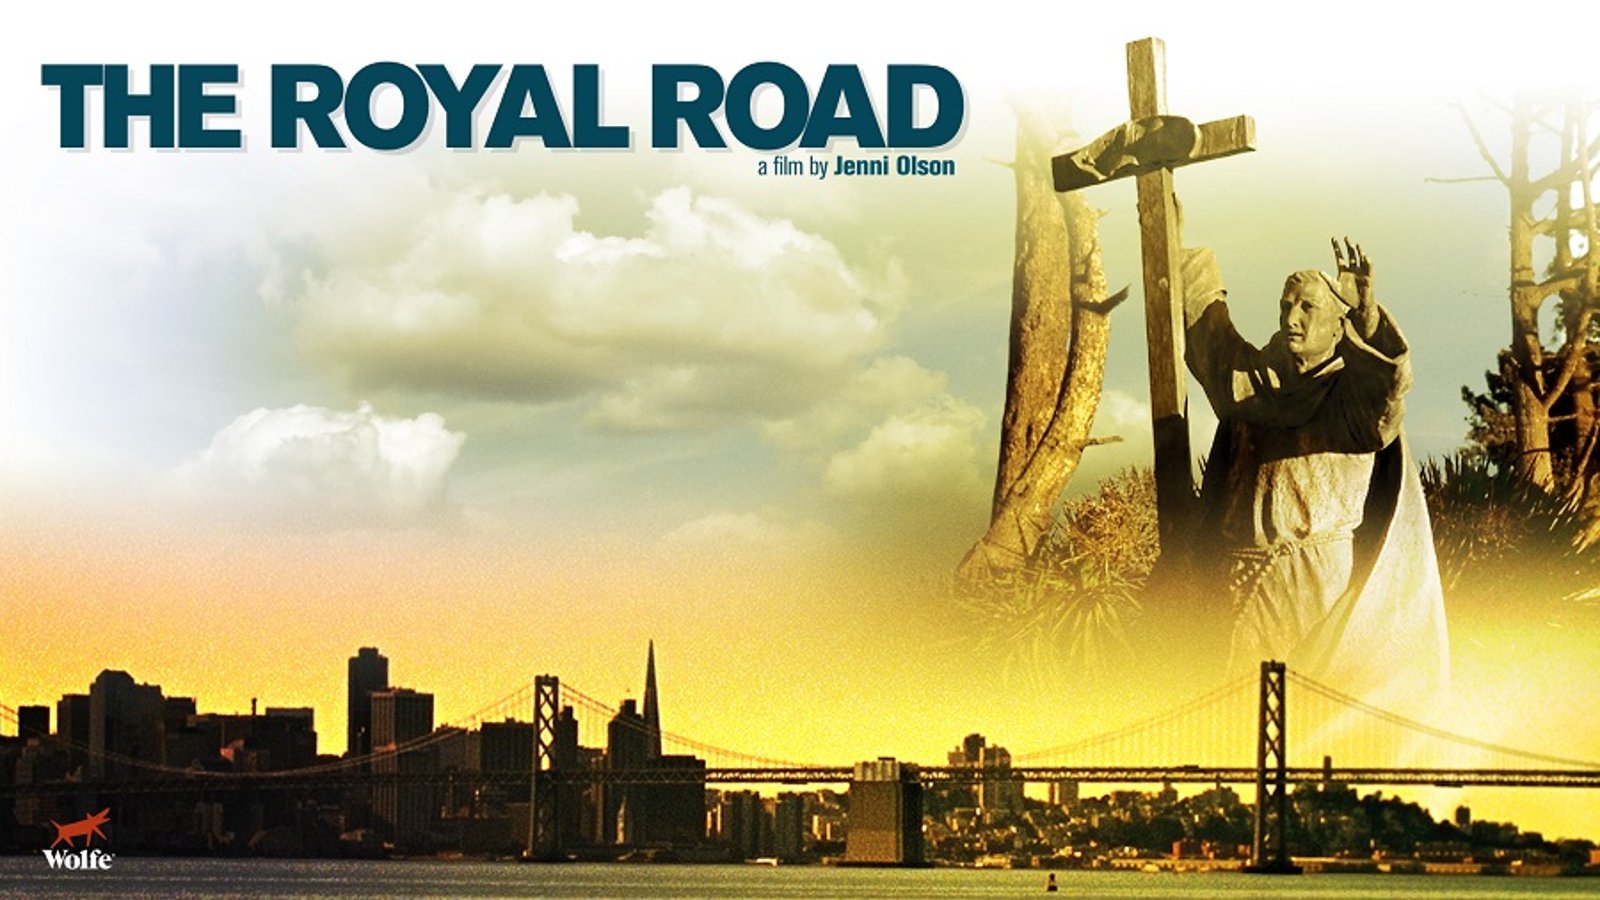 The Royal Road - A Cinematic Essay on Personal and Collective Memory